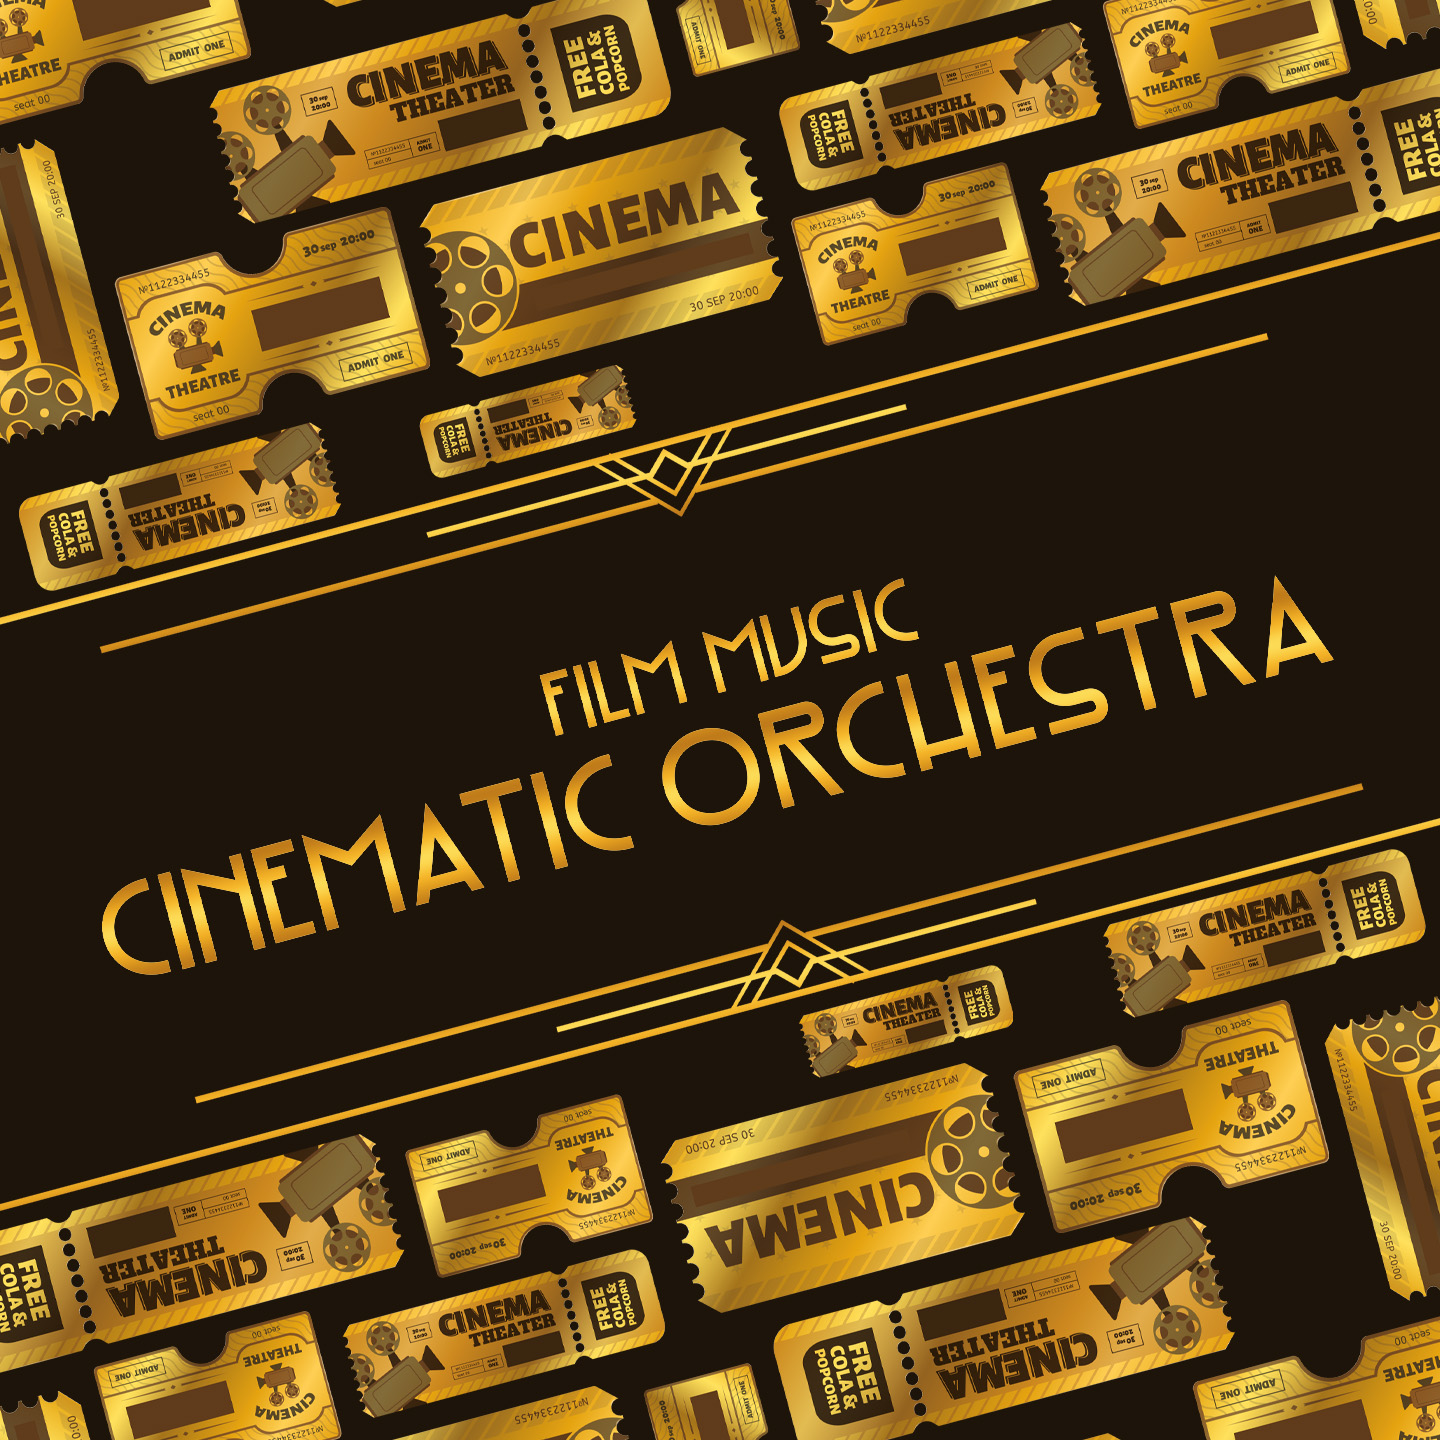 Cinematic orchestra to build. Channel 1 Suite the Cinematic Orchestra.